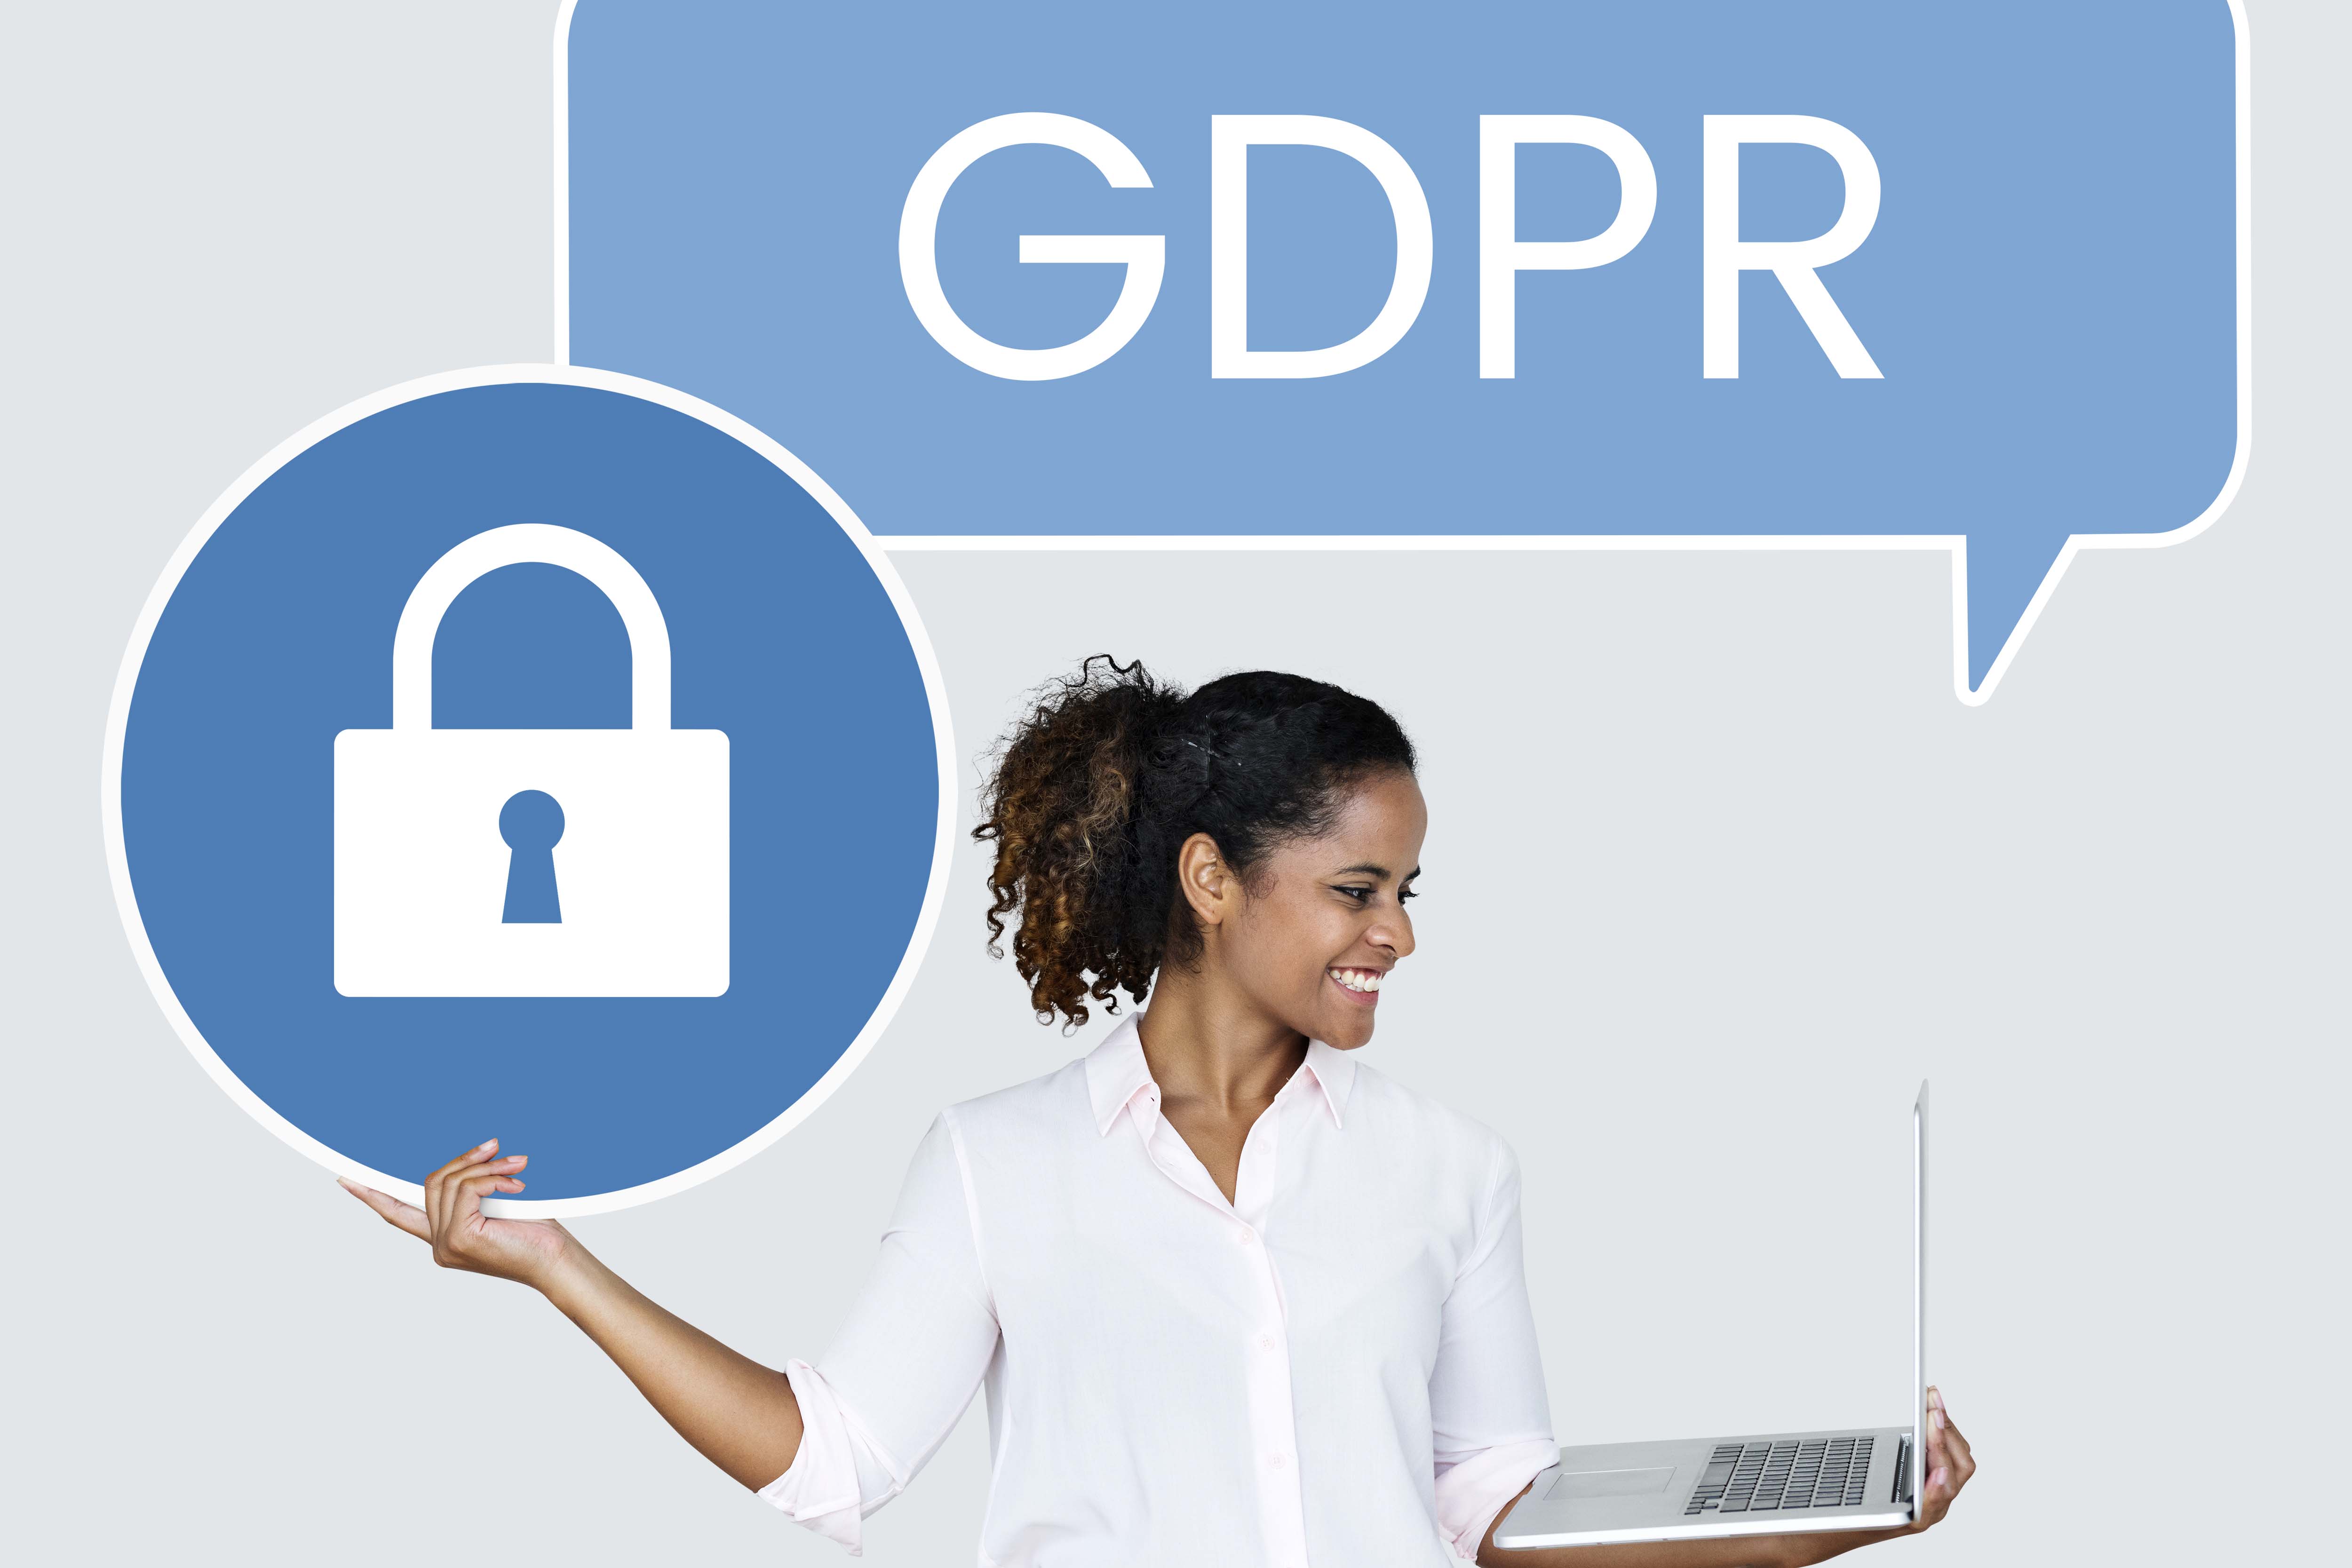 GDPR and data security